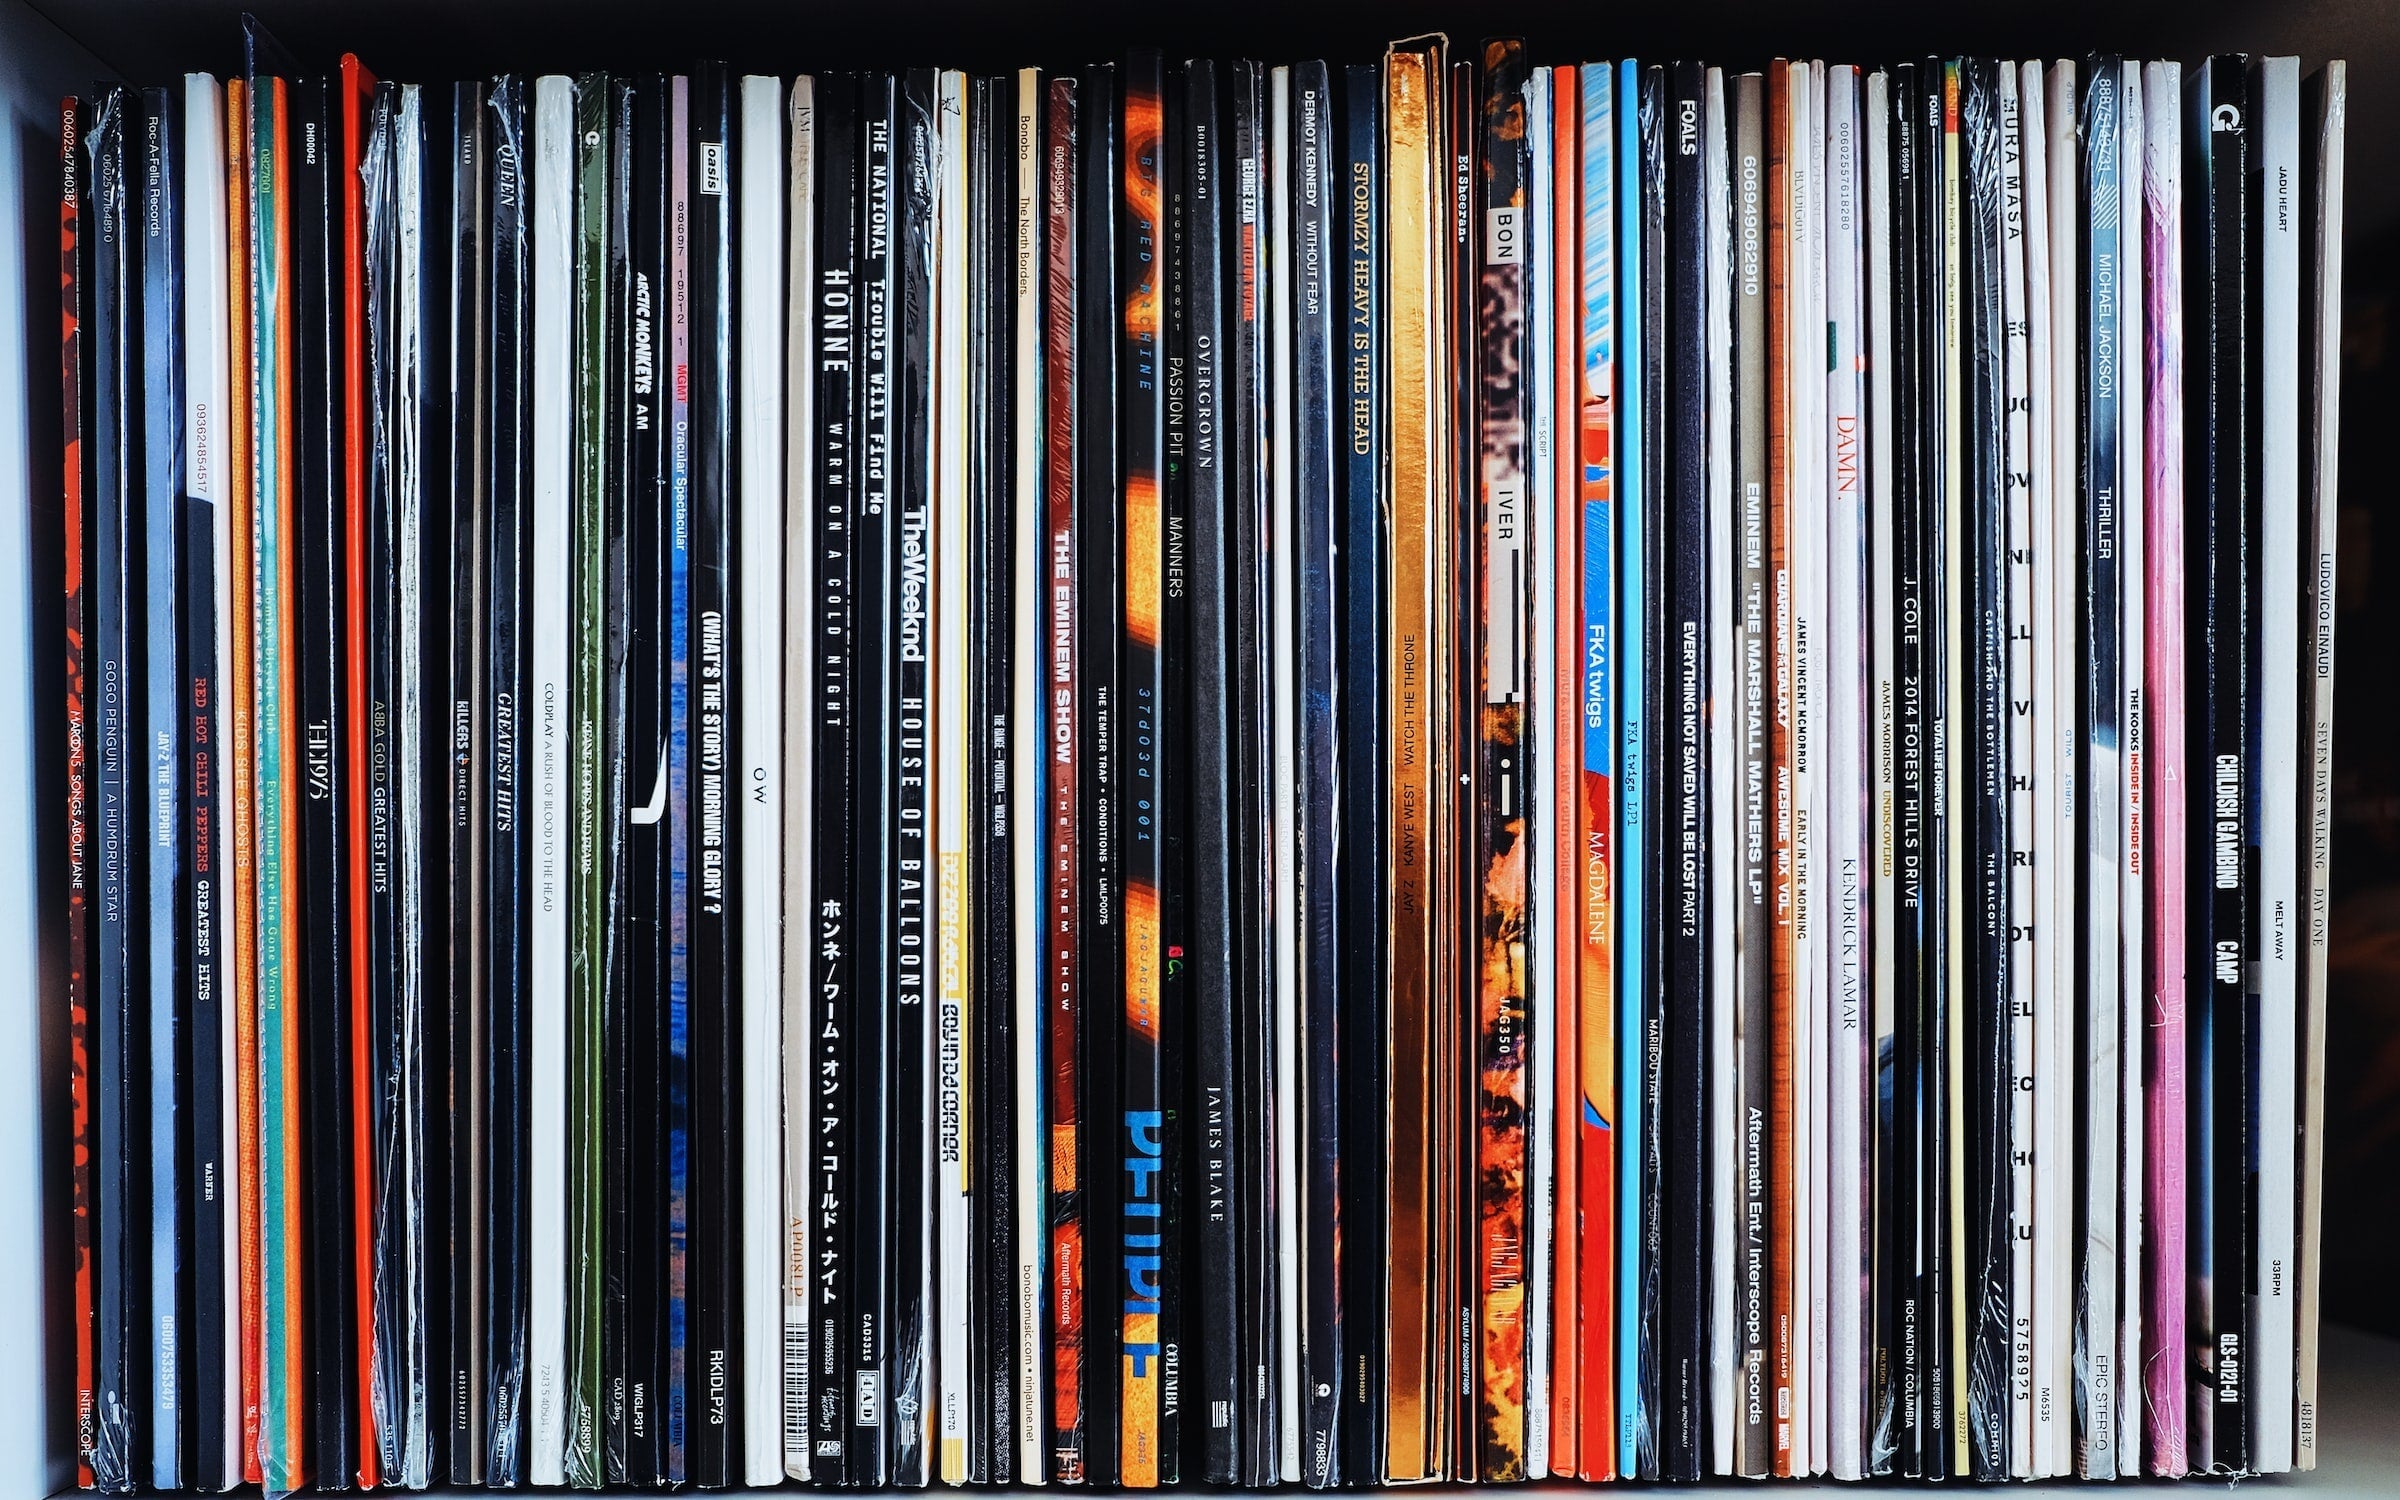 The art of mastering for vinyl: making your music sound its best on wax